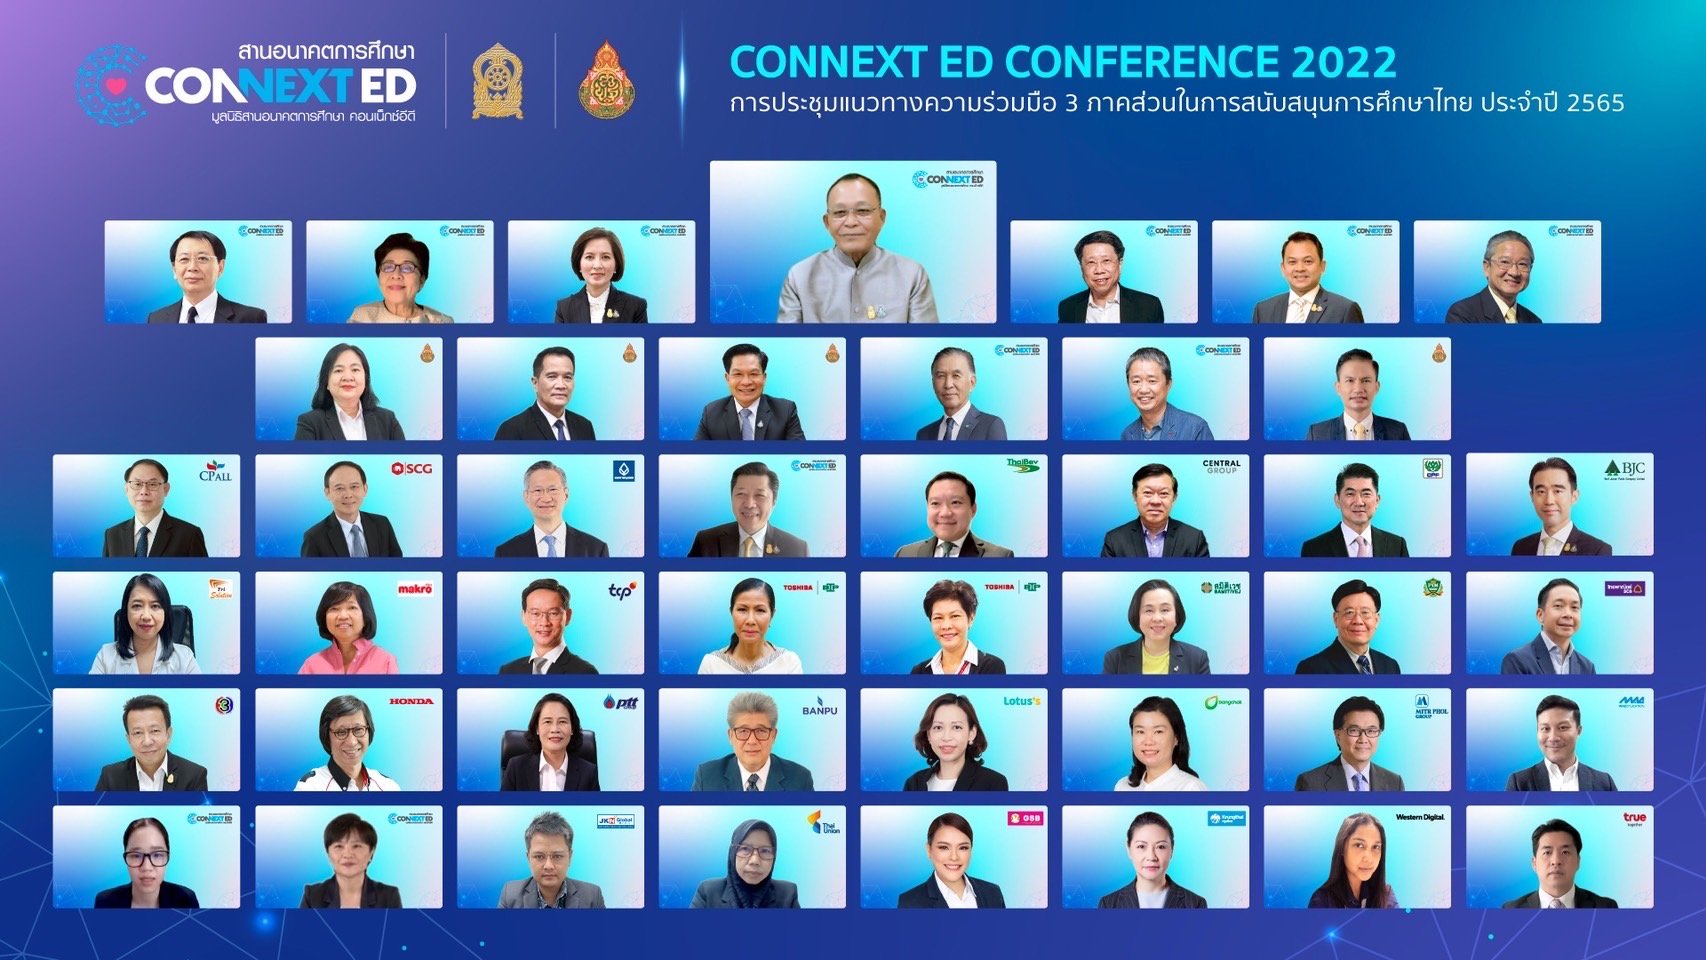 Channel 3 attended an CONNEXT ED Annual Meeting 2022 to drive force of Thai education development towards sustainability